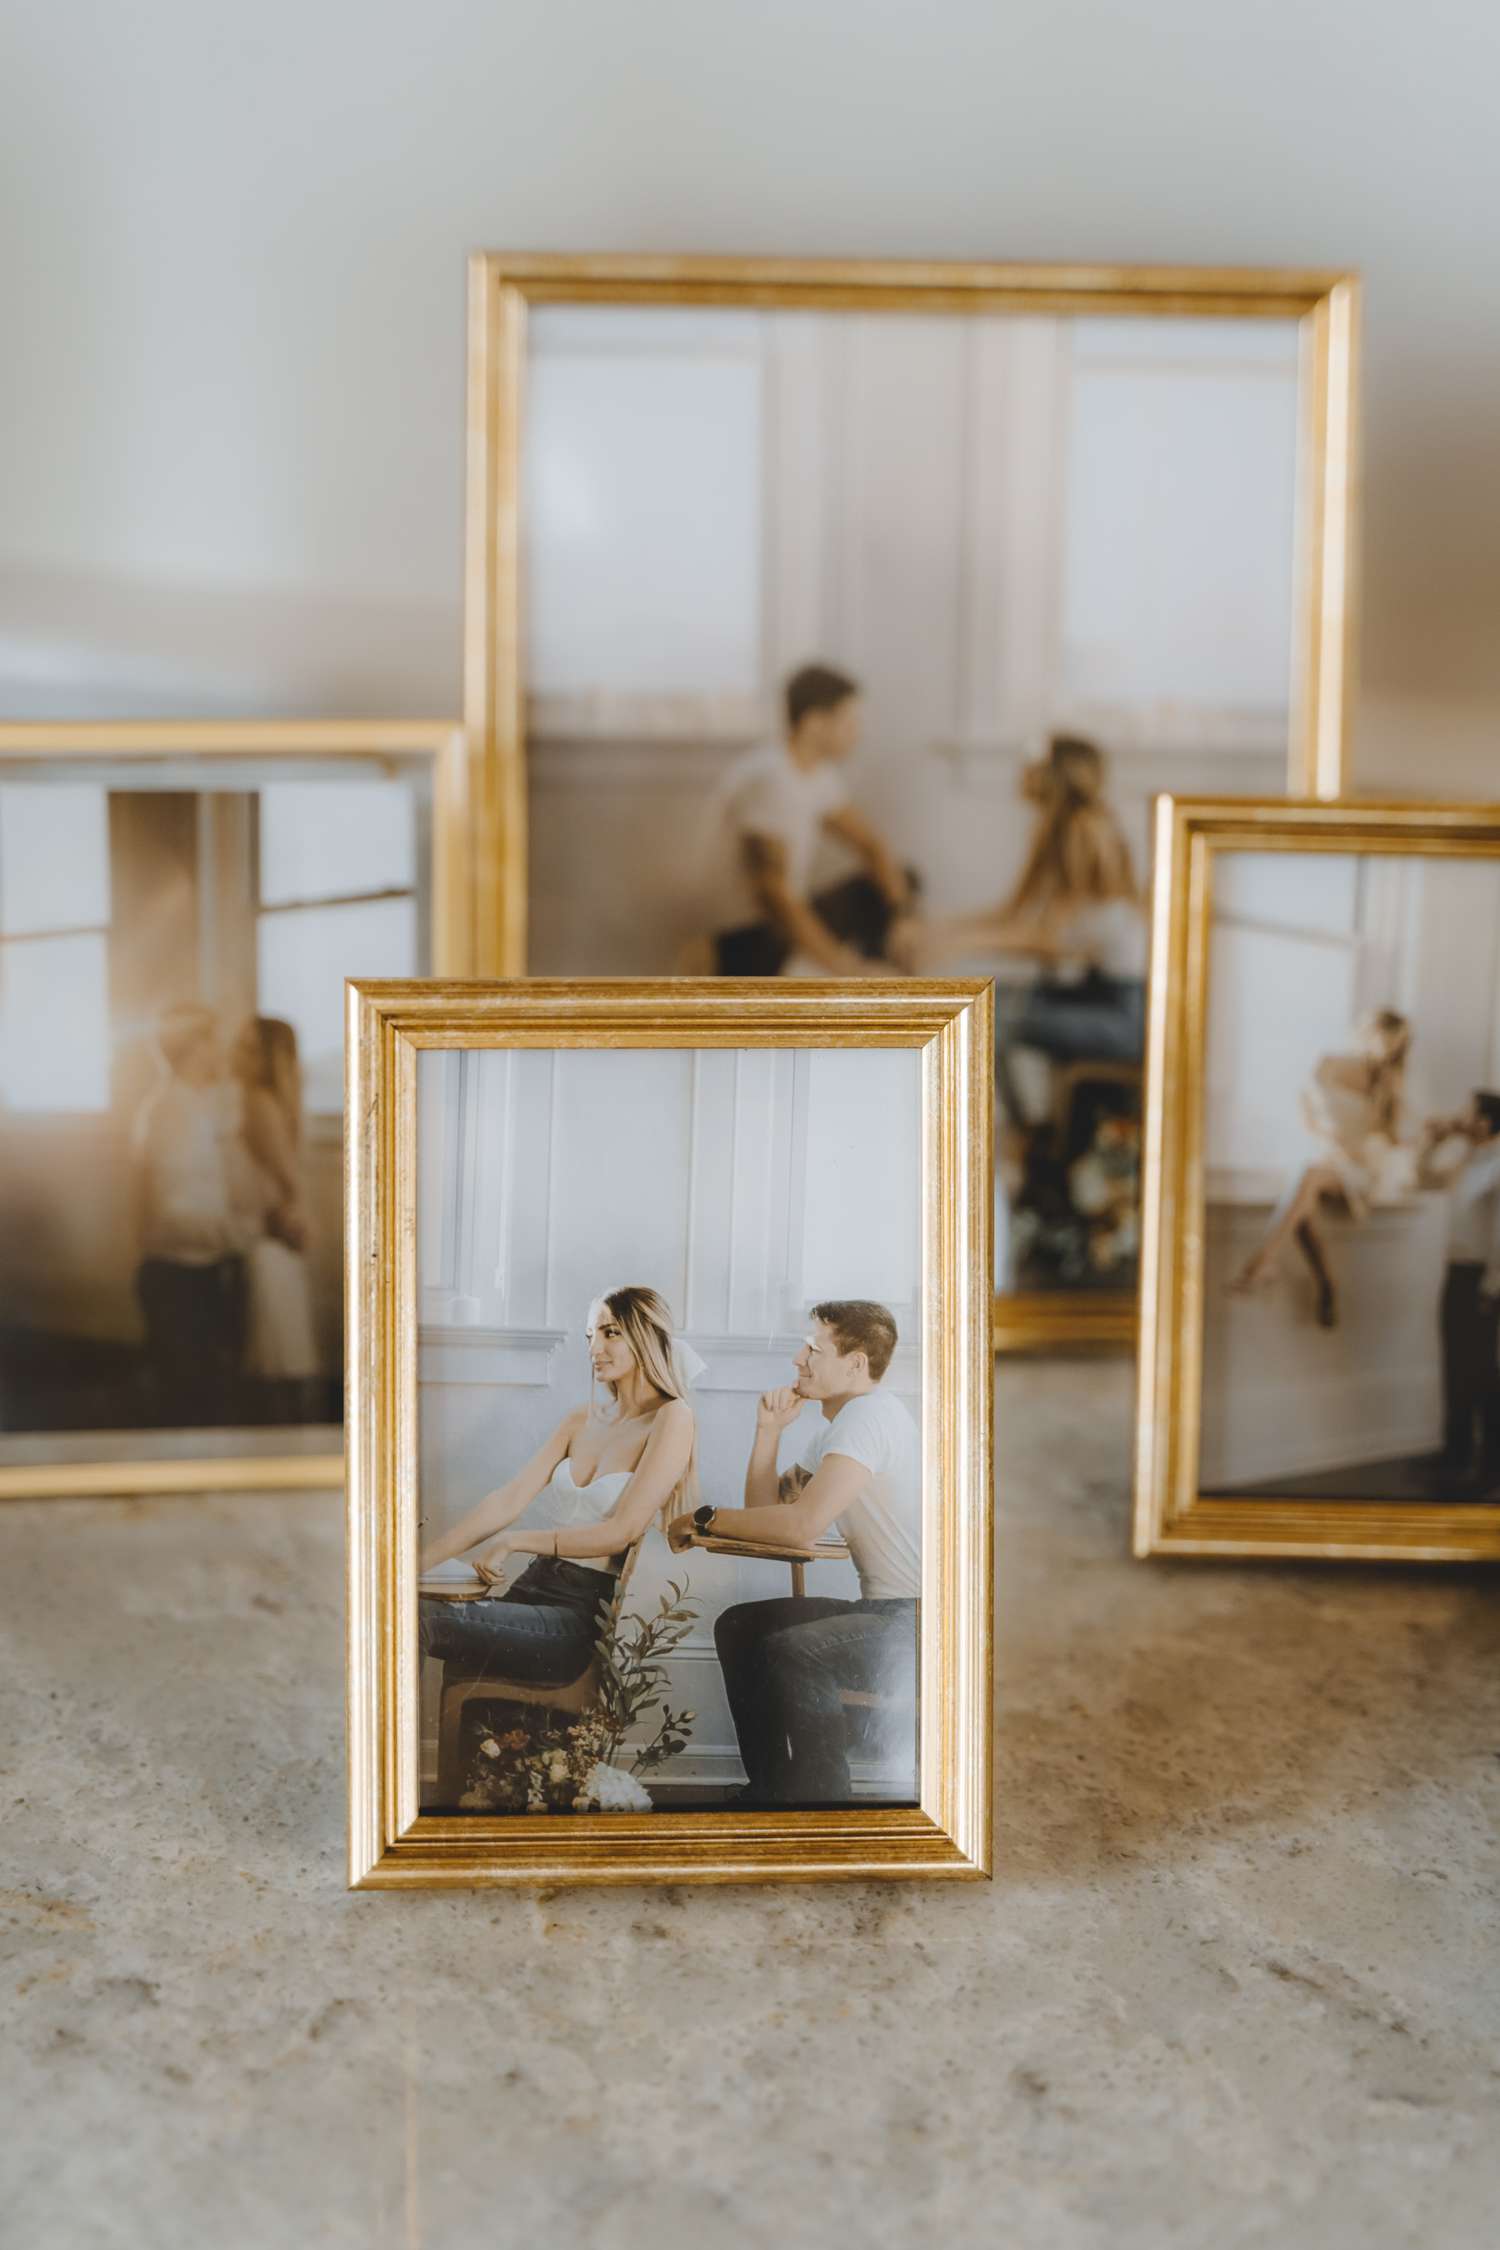 Couple Portraits in Frames